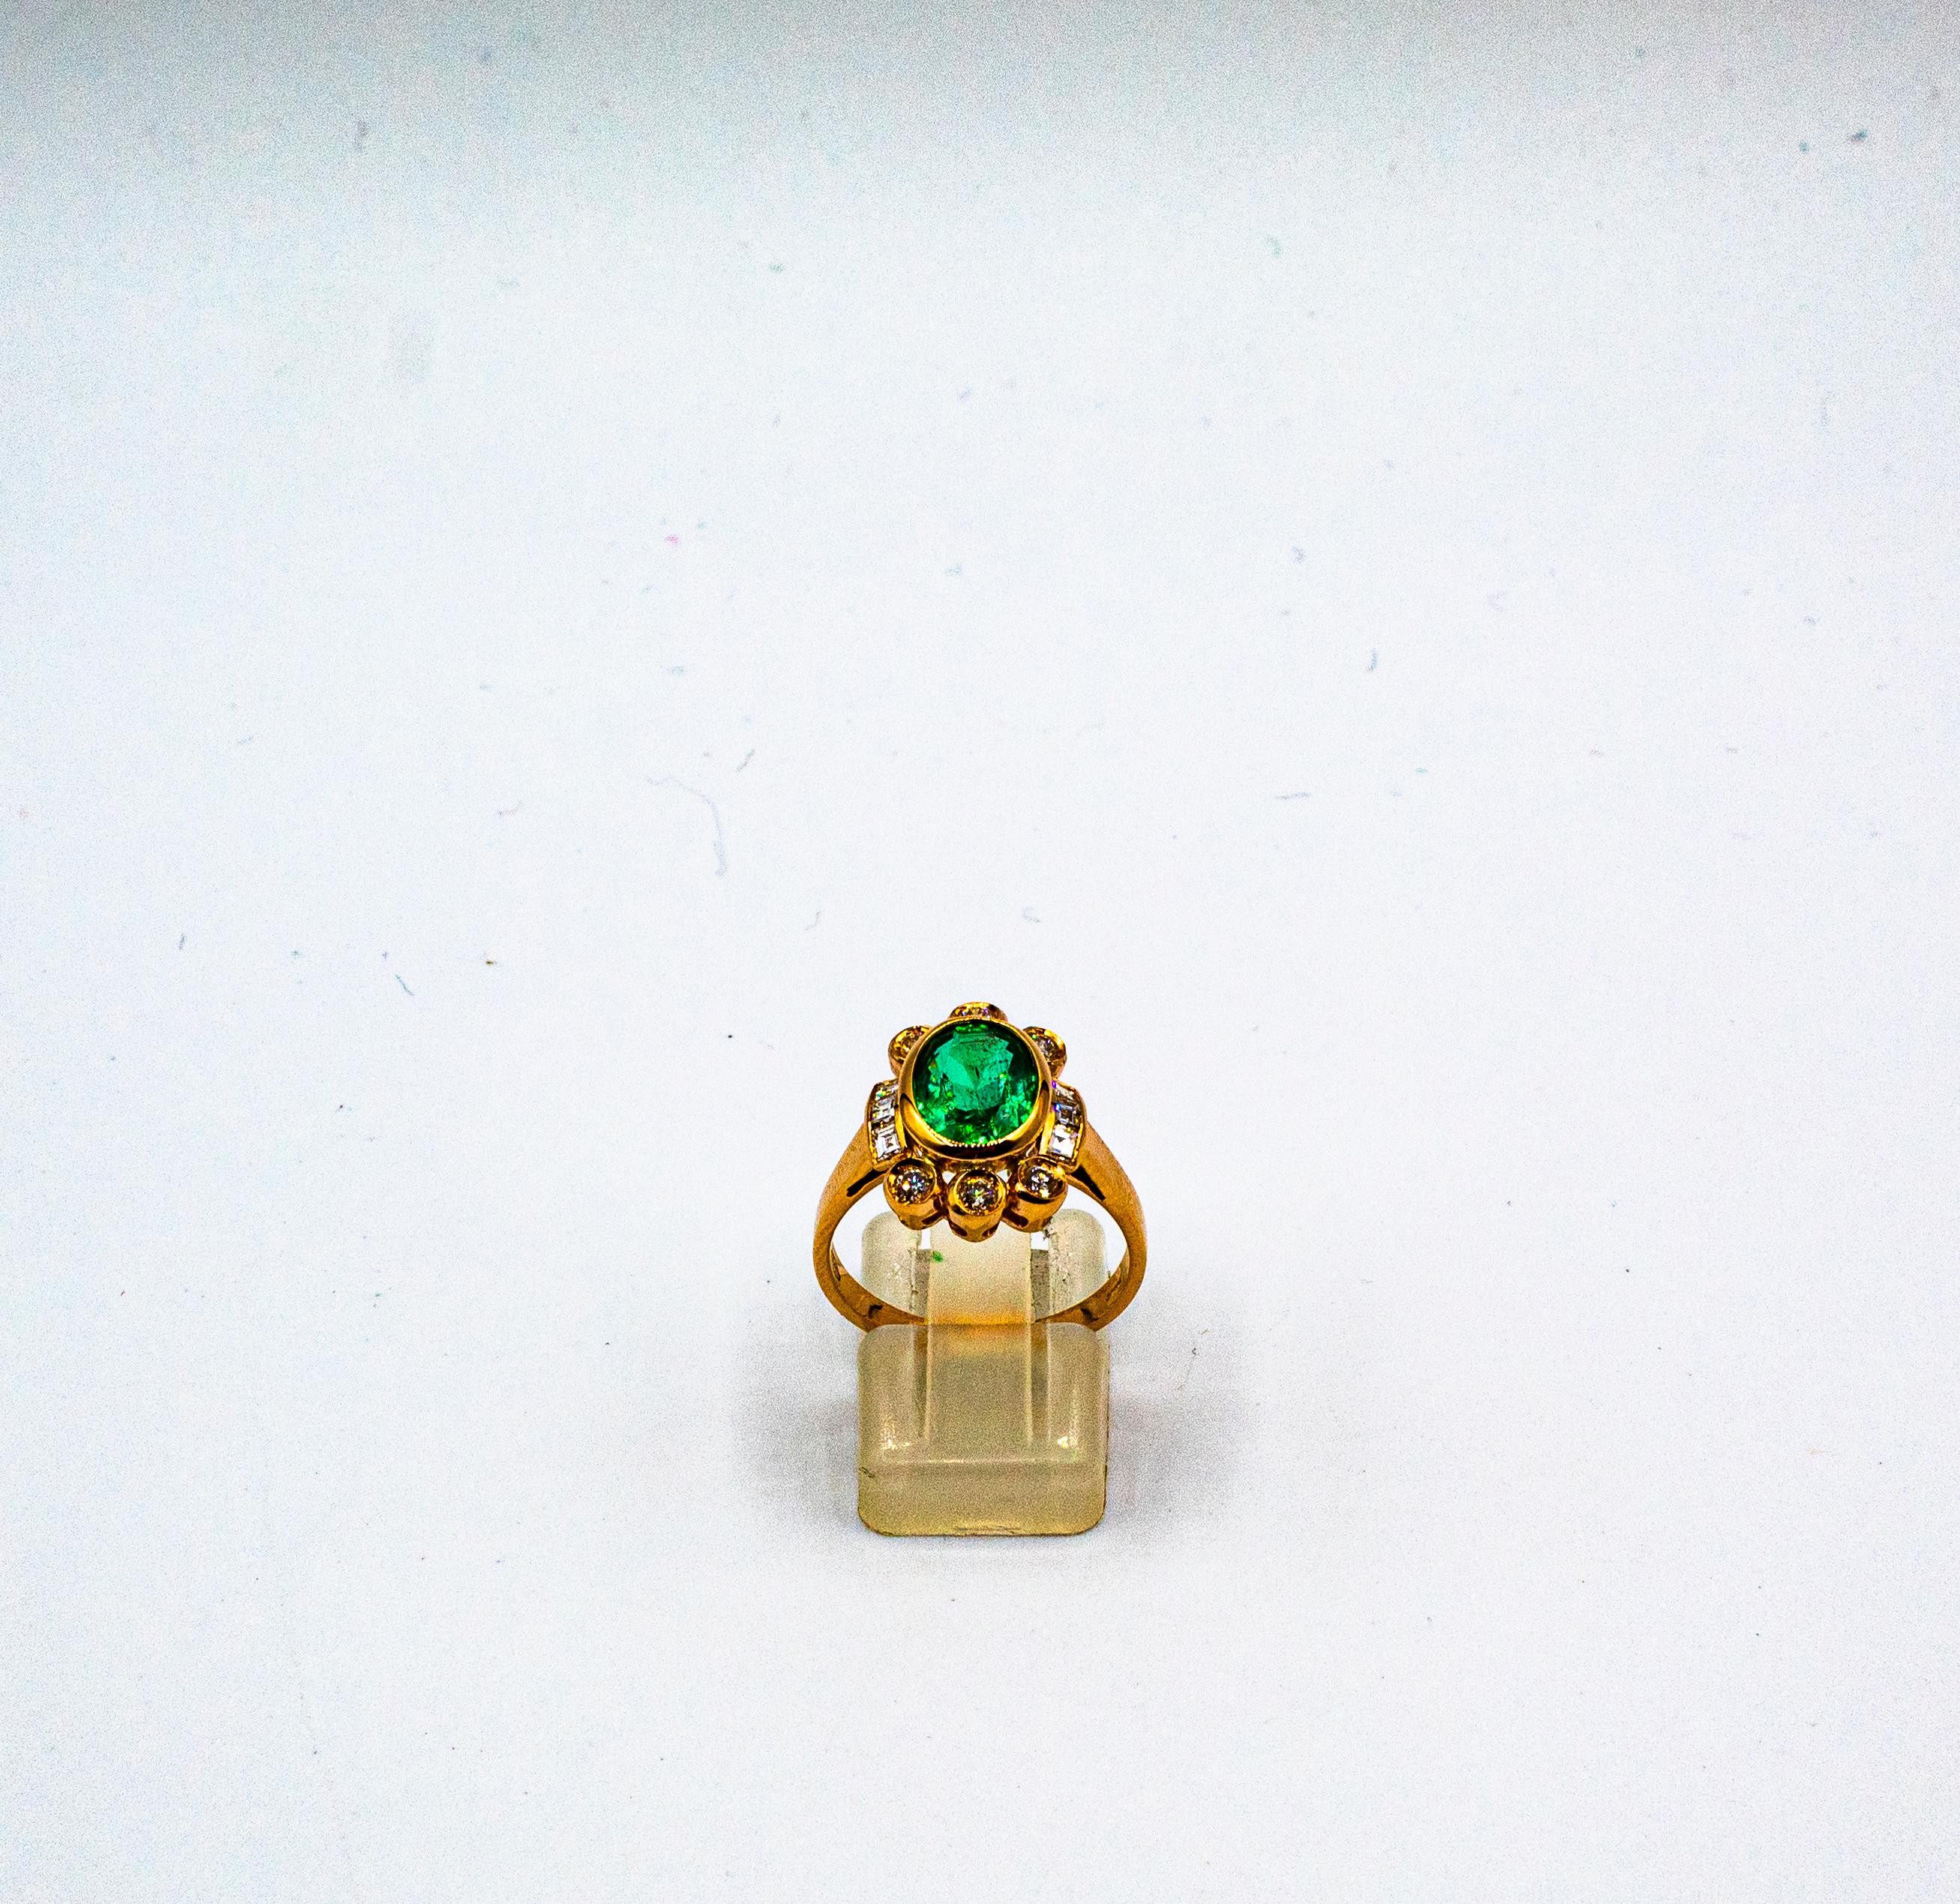 This Ring is made of 14K Yellow Gold.
This Ring has 0.23 Carats of White Brilliant Cut Diamonds.
This Ring has 0.30 Carats of White Carré Cut Diamonds.
This Ring has a 1.76 Carats Natural Zambia Oval Cut Emerald.
This Ring is inspired by Art